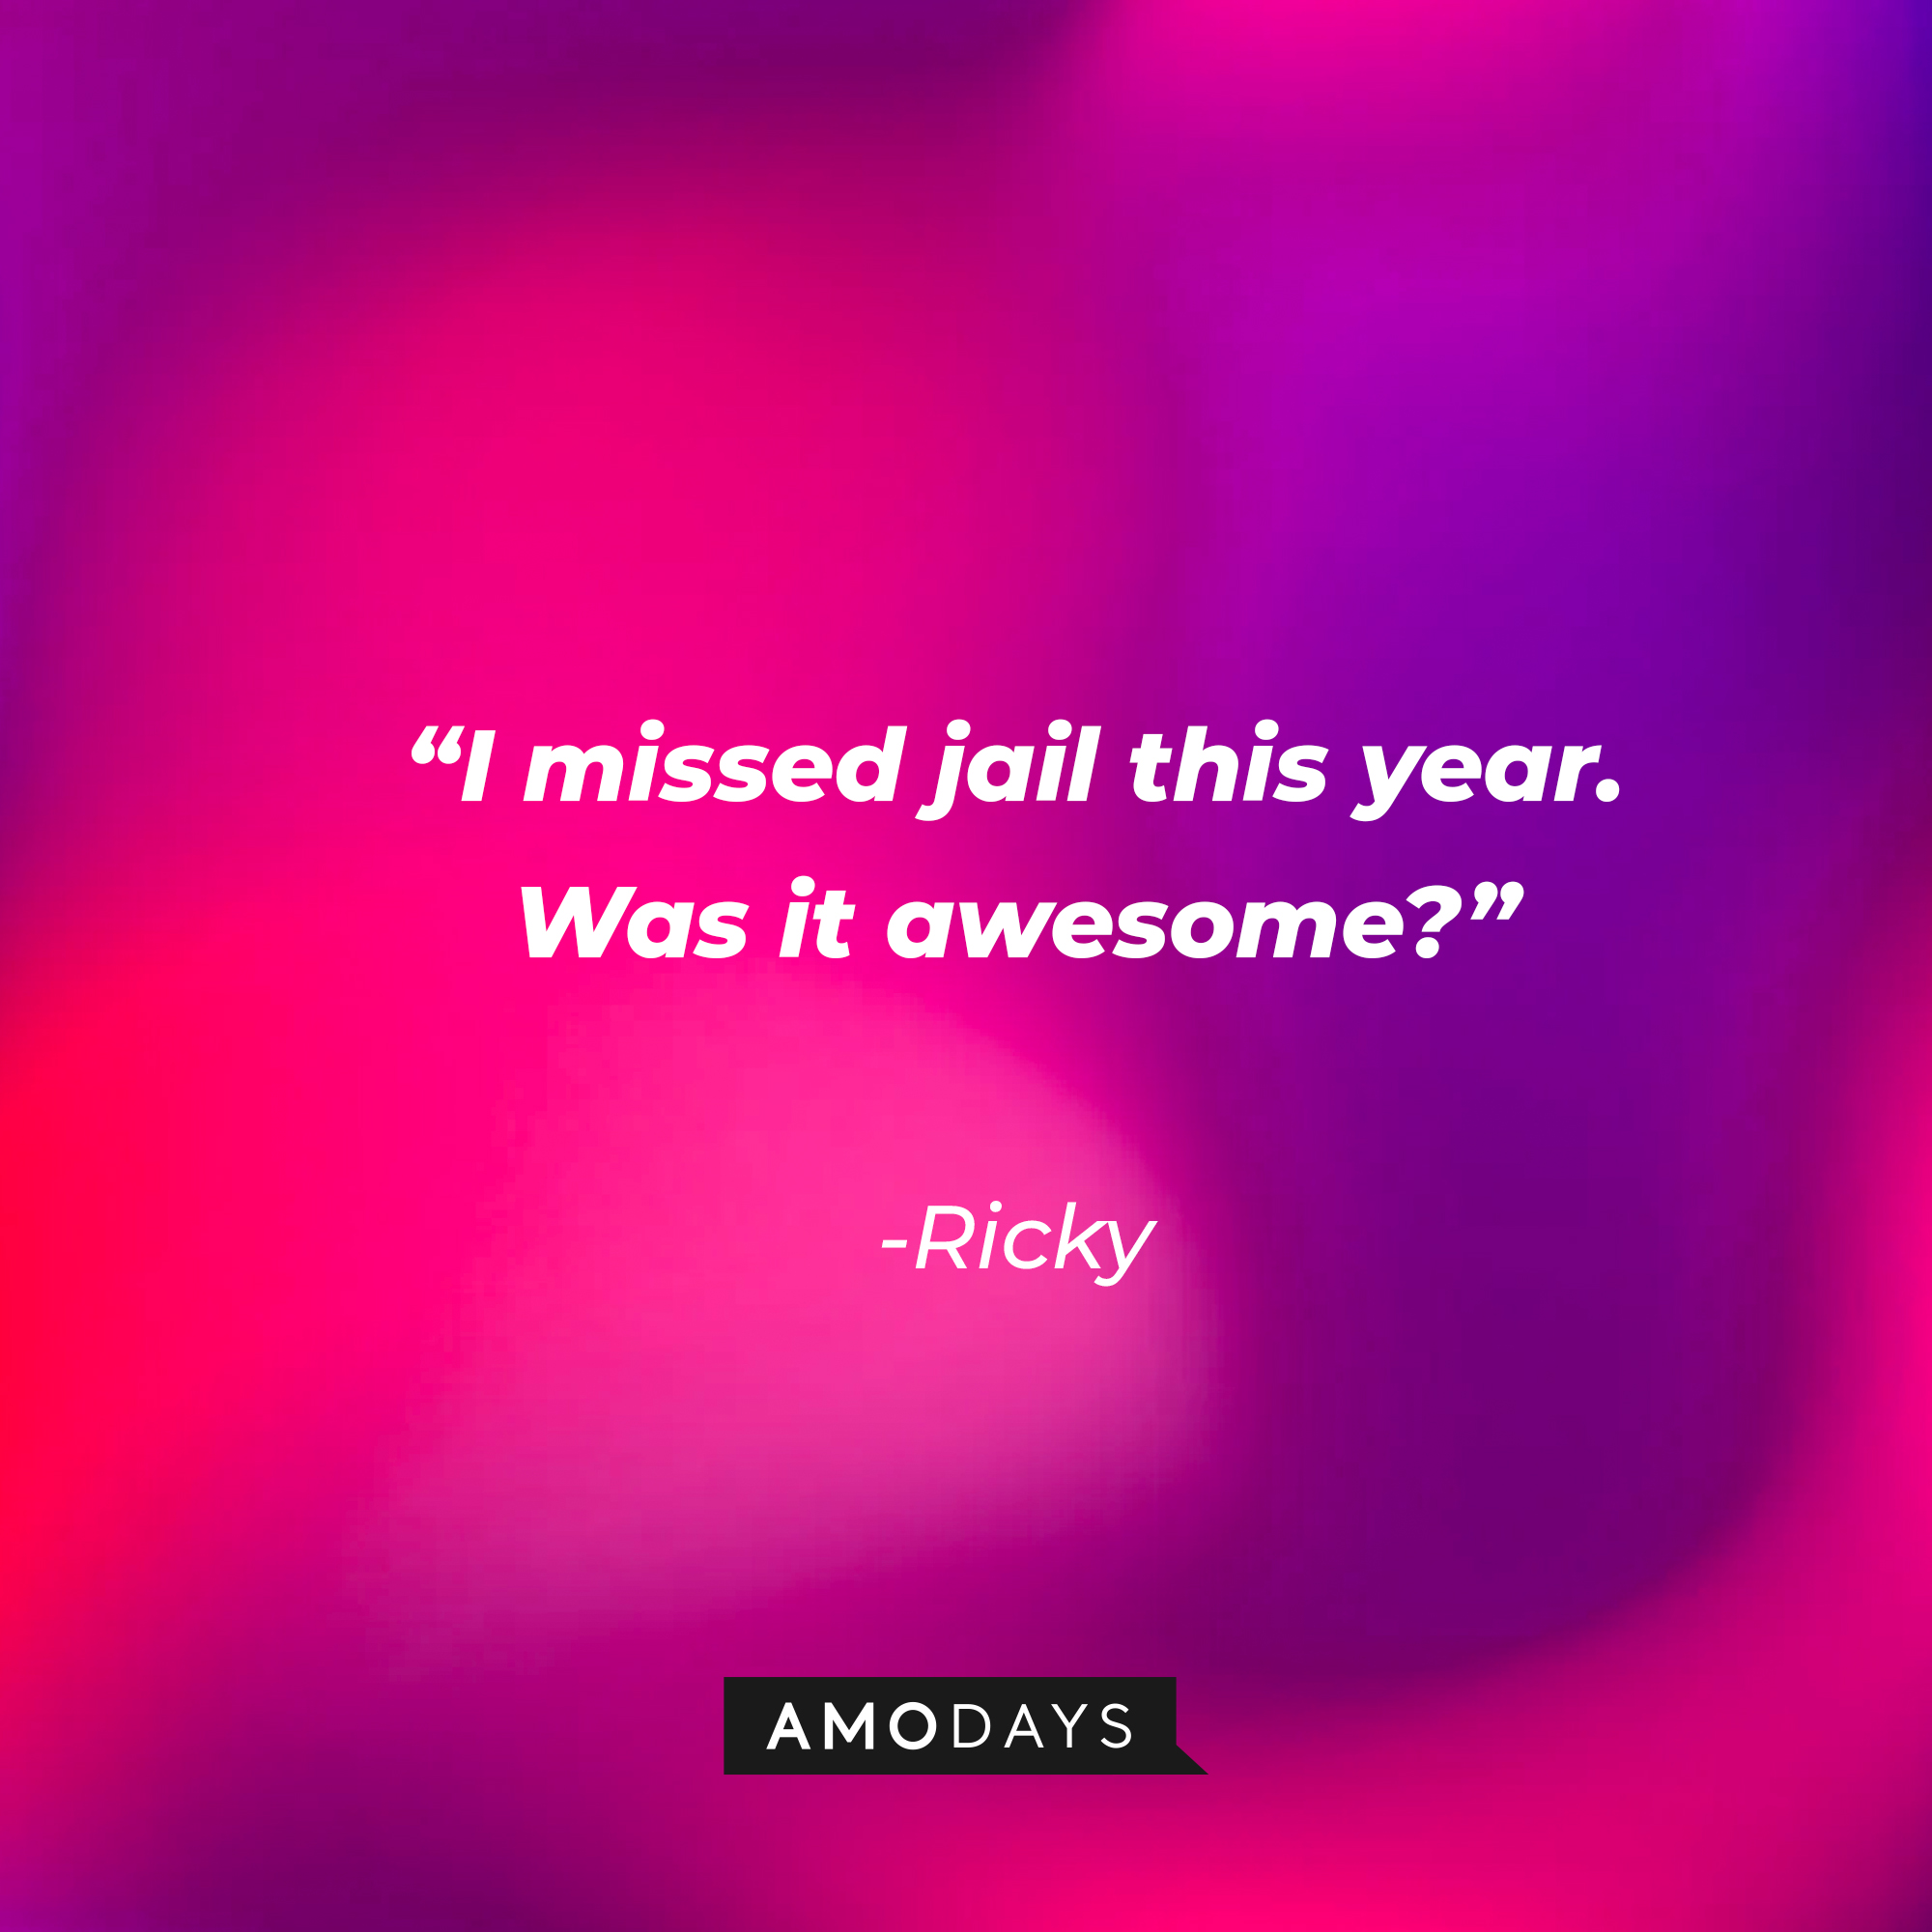 Ricky's quote: “I missed jail this year. Was it awesome?” | Source: Amodays